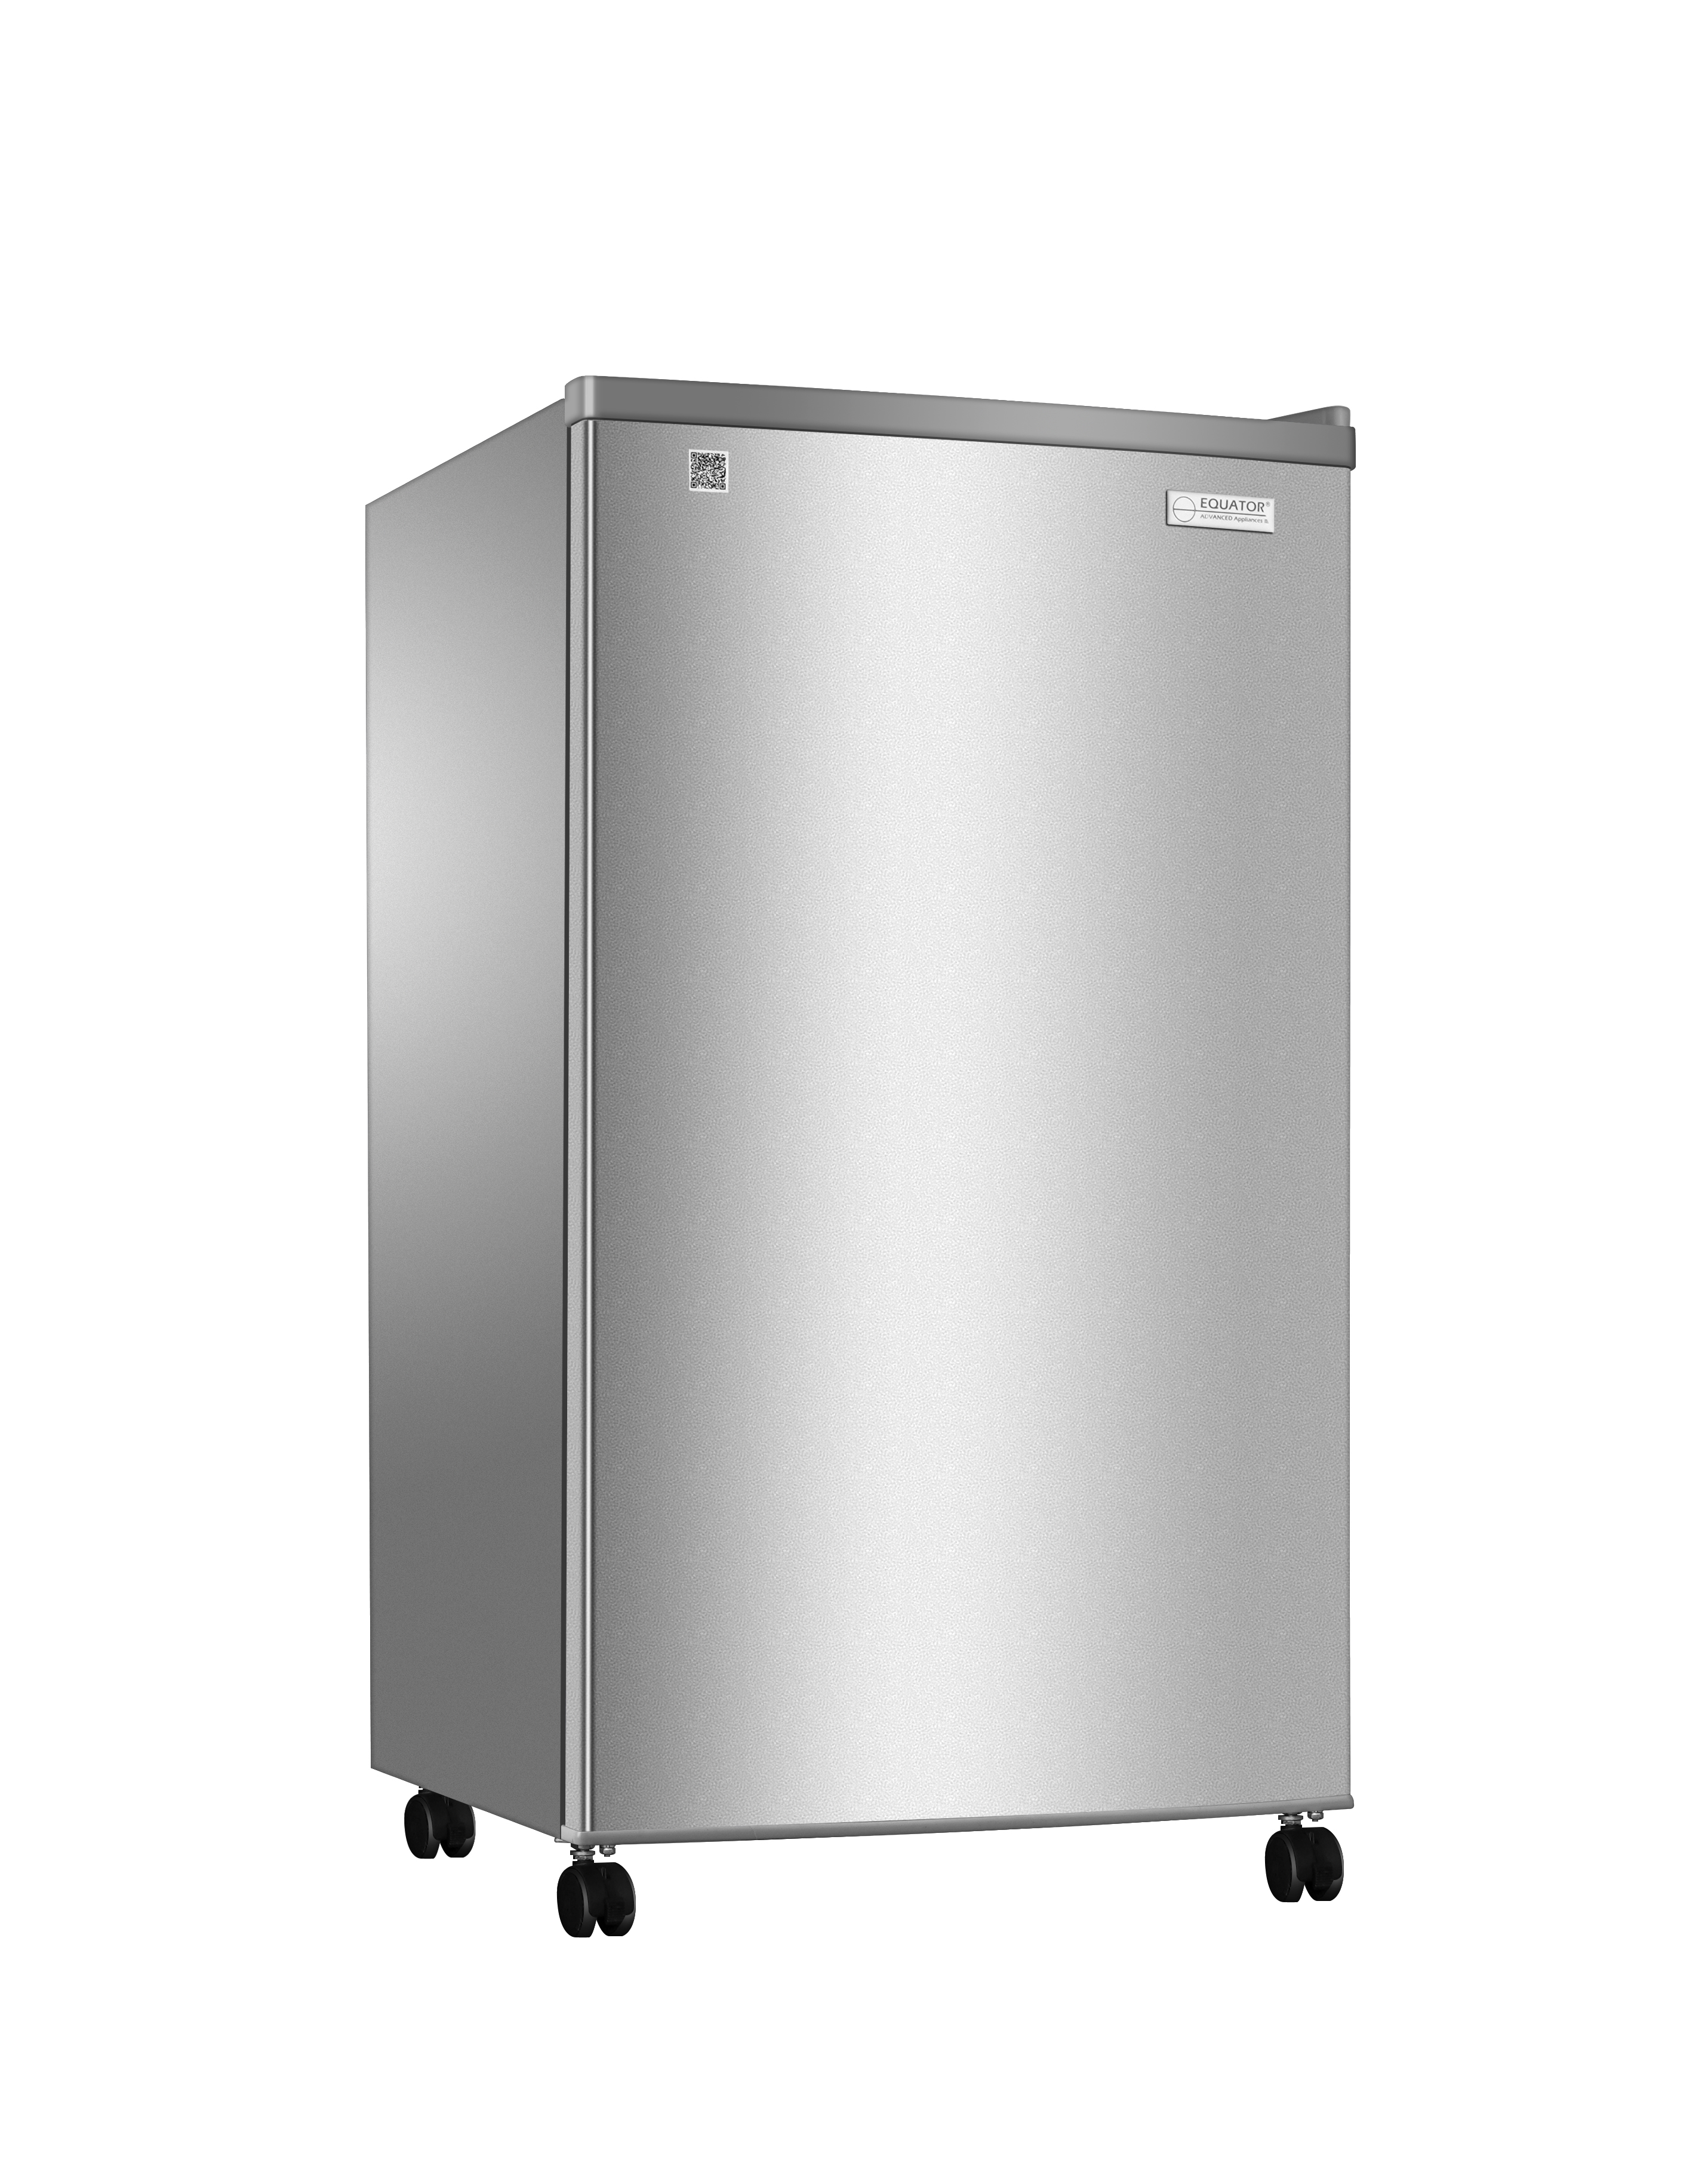 Equator 3.5 cu.ft. Real Stainless Outdoor Refrigerator - Wine Rack and Casters